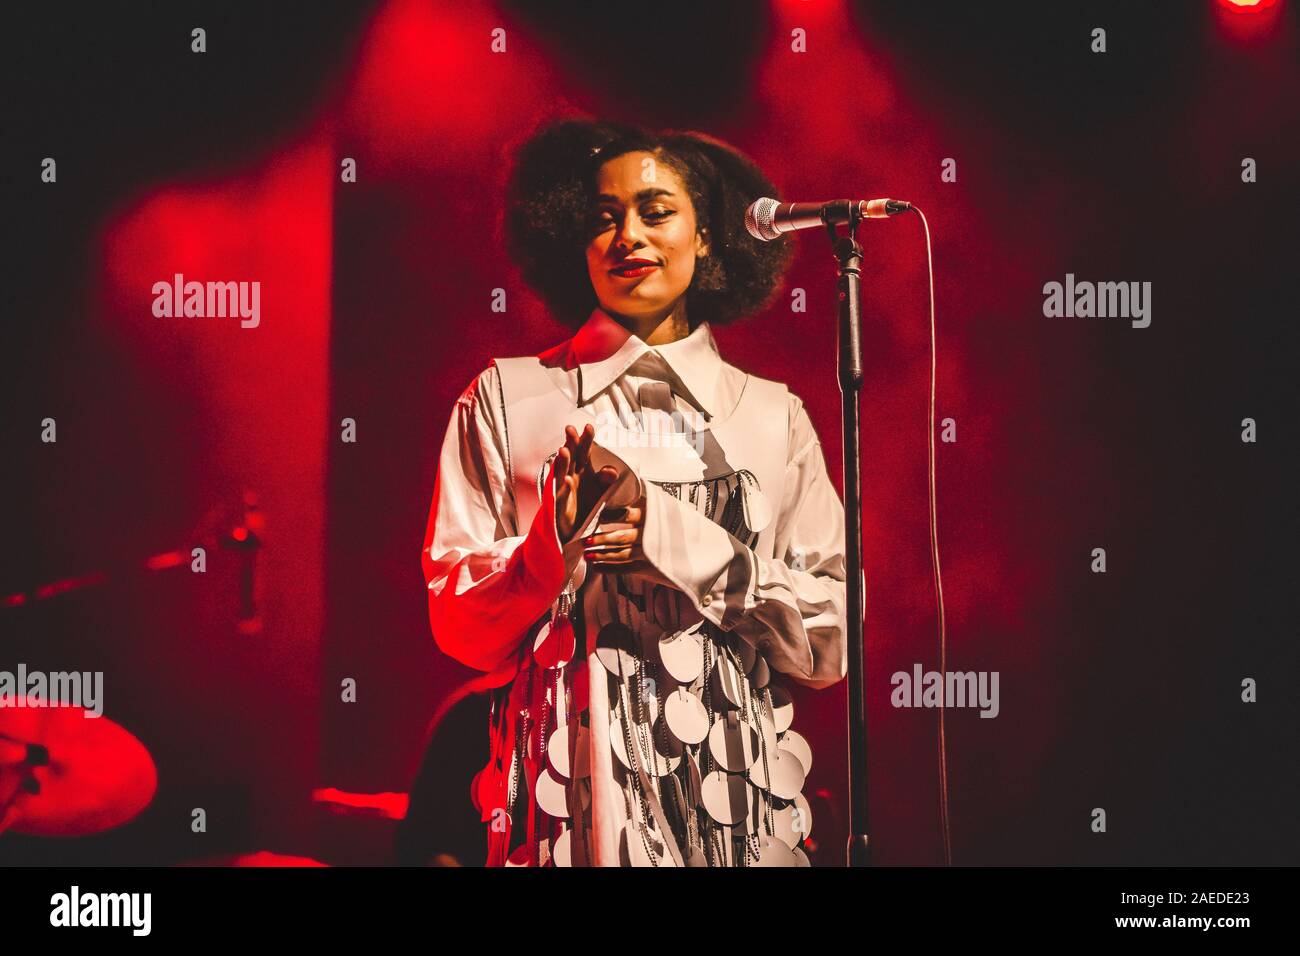 Celeste Epiphany Waite (born 5 May 1994) known mononymously as Celeste, is an American-British neo soul singer-songwriter. Since 2017, Celeste has released two extended plays and eight singles and has embarked on two headlining tours of Europe and the United States respectively. She has performed at some of Europe's biggest festivals such as Glastonbury, Primavera Sound, and Field Day.Waite was named as BBC Music Introducing's Artist of 2019, and will be given the Critics' Choice Award at the 2020 Brit Awards, an award previously crowned by names such as Adele, Sam Smith, Ellie Goulding and Fl Stock Photo